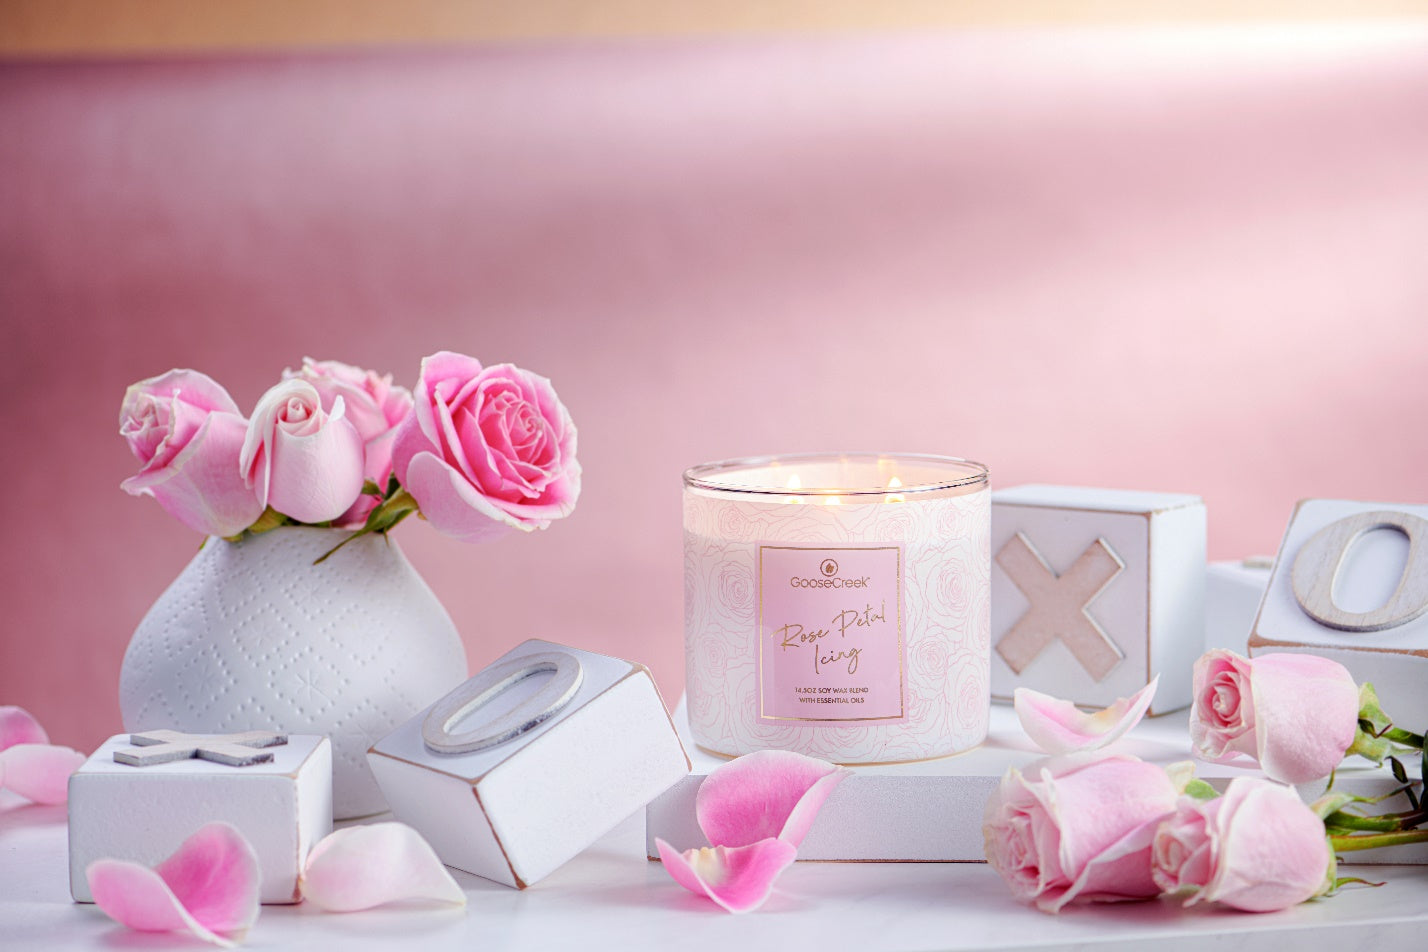 Bridal Shower Gift Ideas: How to Pamper the Bride-to-Be – Goose Creek Candle